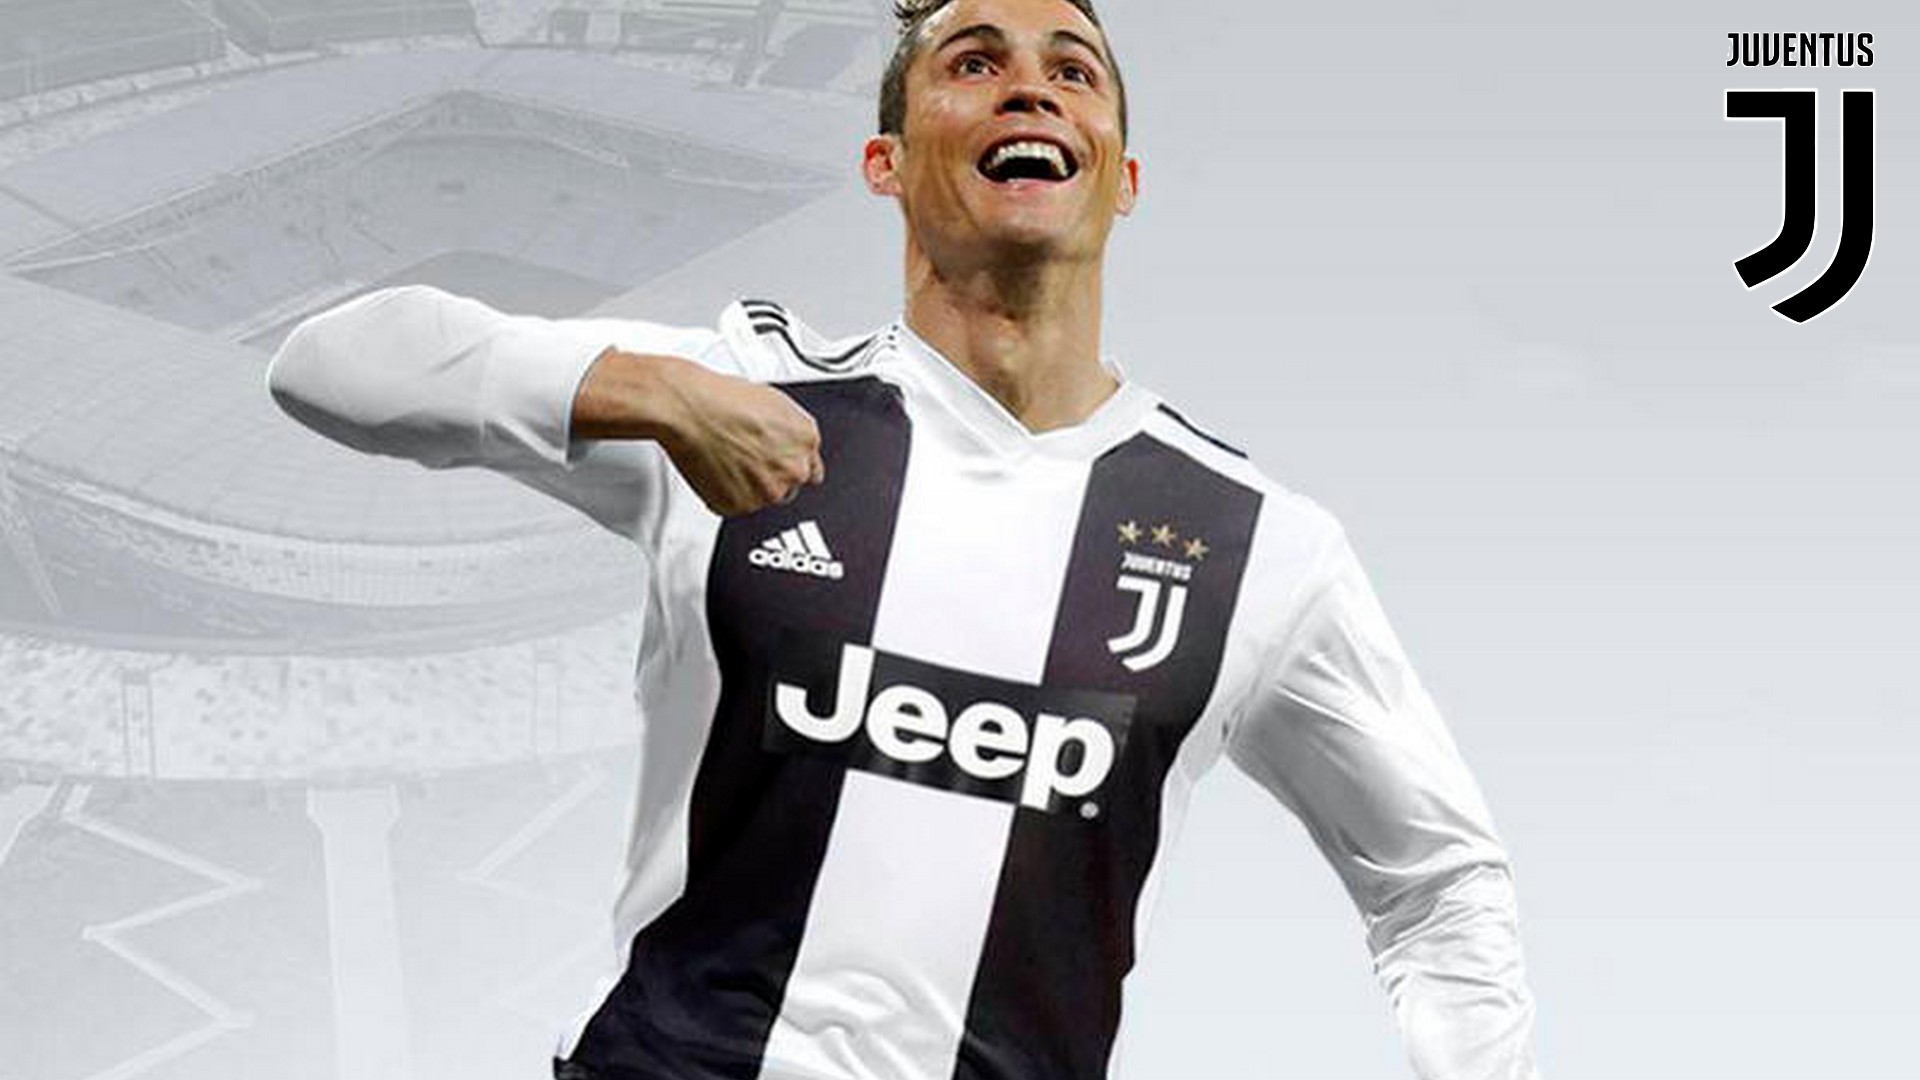 Ronaldo 7 Juventus Desktop Wallpapers with resolution 1920x1080 pixel. You can make this wallpaper for your Mac or Windows Desktop Background, iPhone, Android or Tablet and another Smartphone device